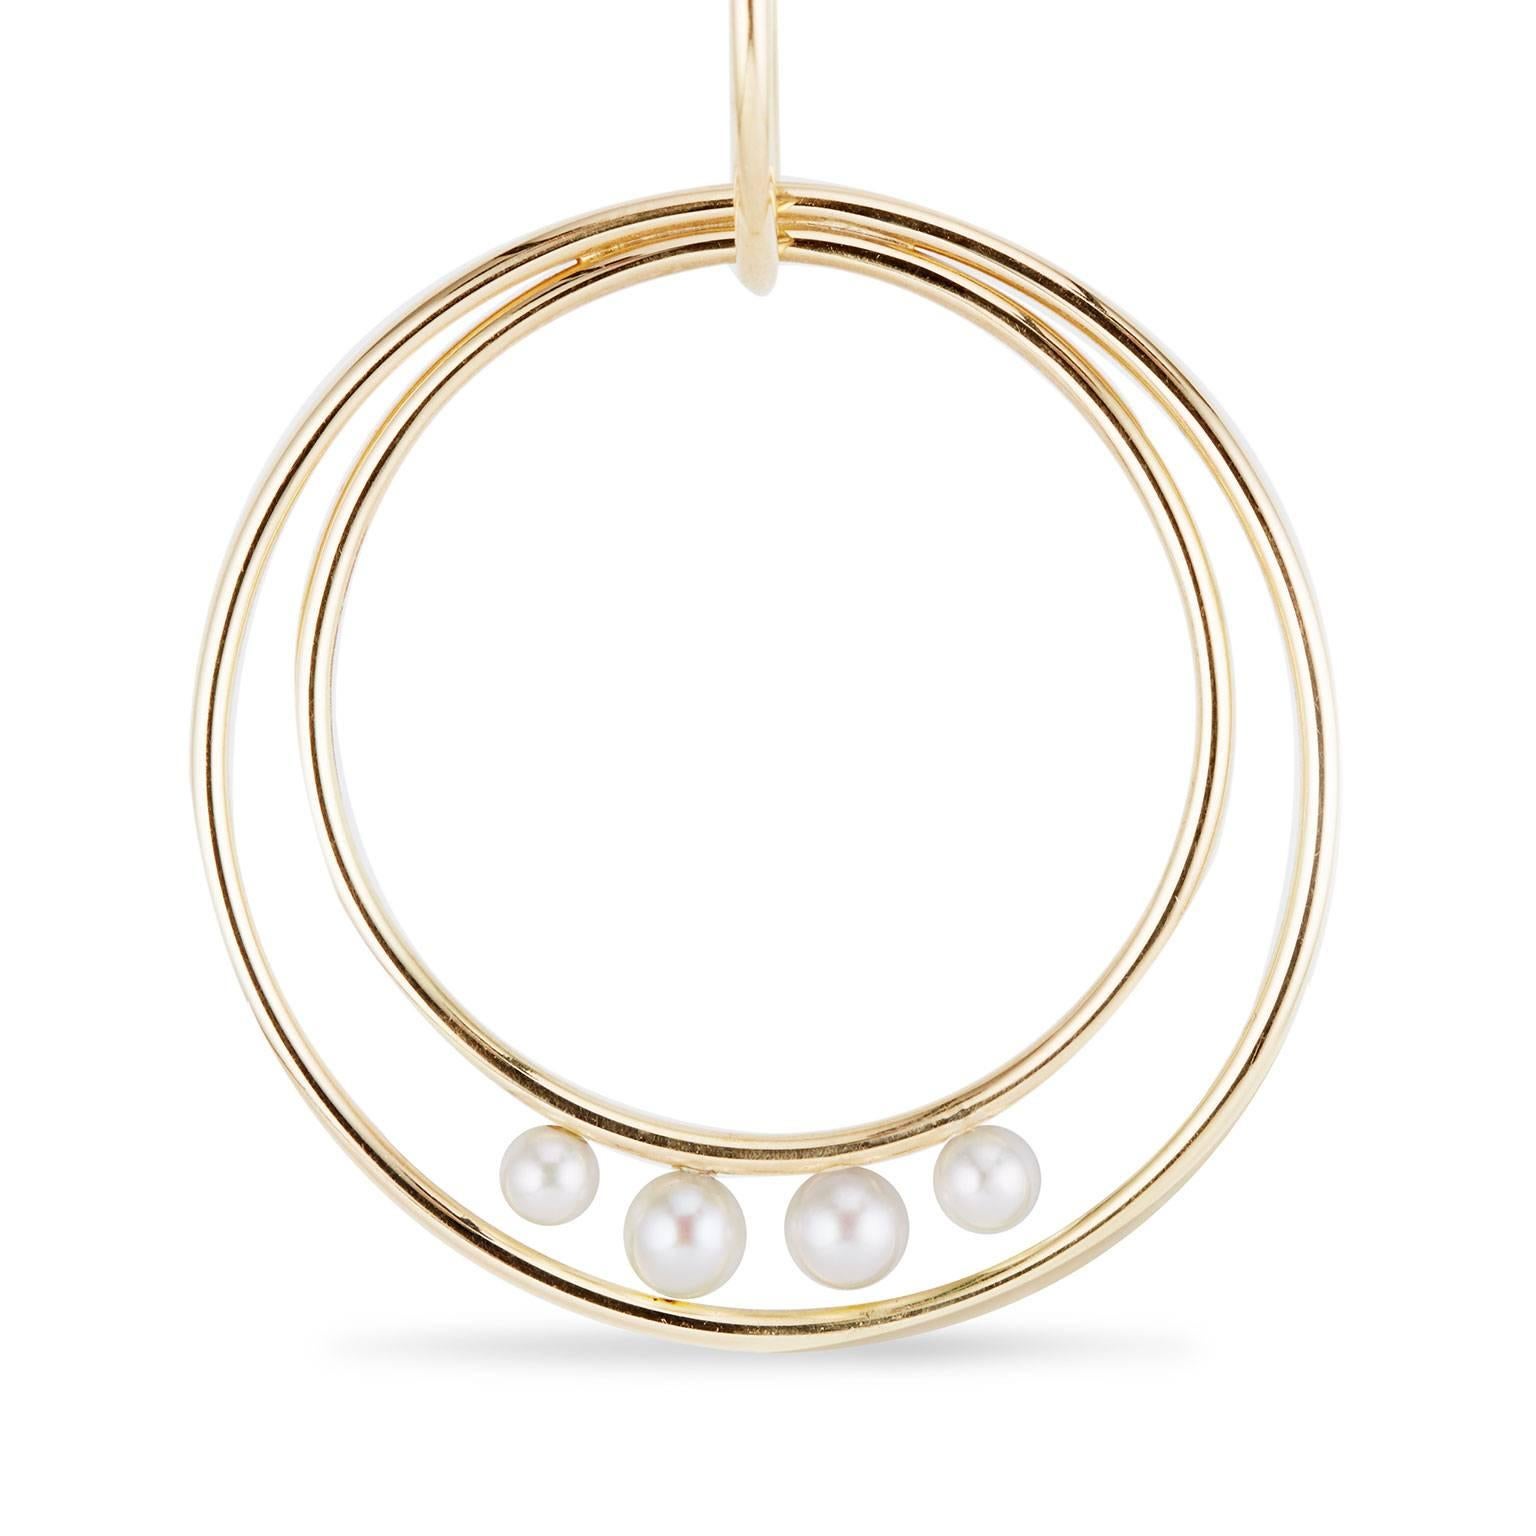 The classic elegance of pearls fused with the striking forwardness of interlinked 18-carat gold hoops. Not your grandmother’s pearls. The PLANETARY PEARL HOOPS earrings from Cushla Whiting's Celestial Collection are made in 18 carat gold with small